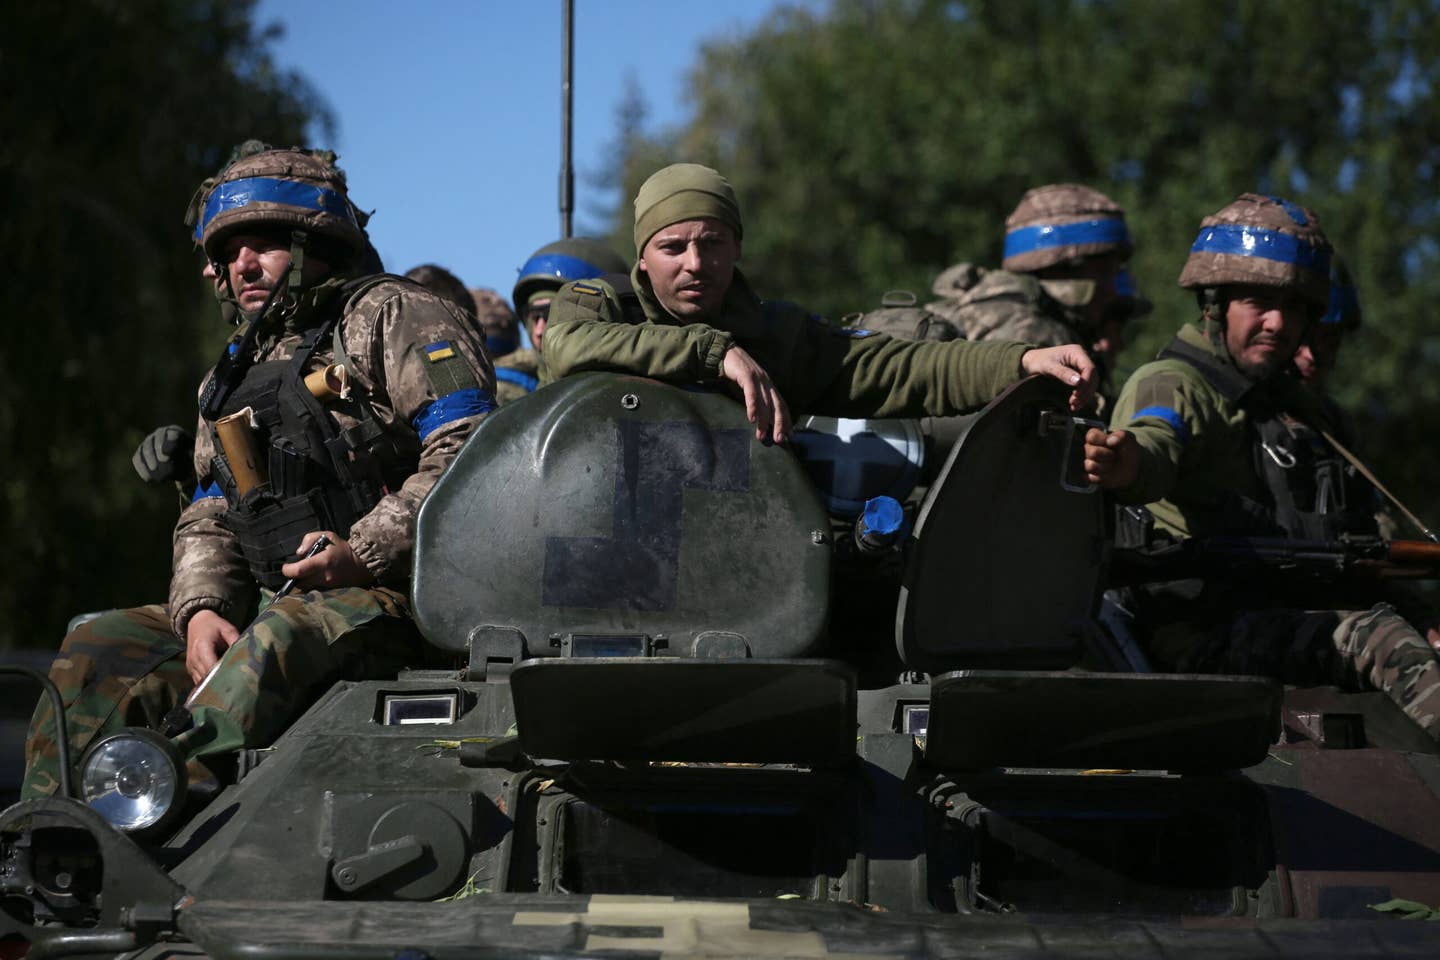 Ukrainian soldiers sit on an armored personnel carrier (APC) on their way to the frontline against Russian troops in the Donetsk region on September 21, 2022. <em>Photo by ANATOLII STEPANOV/AFP via Getty Images</em>